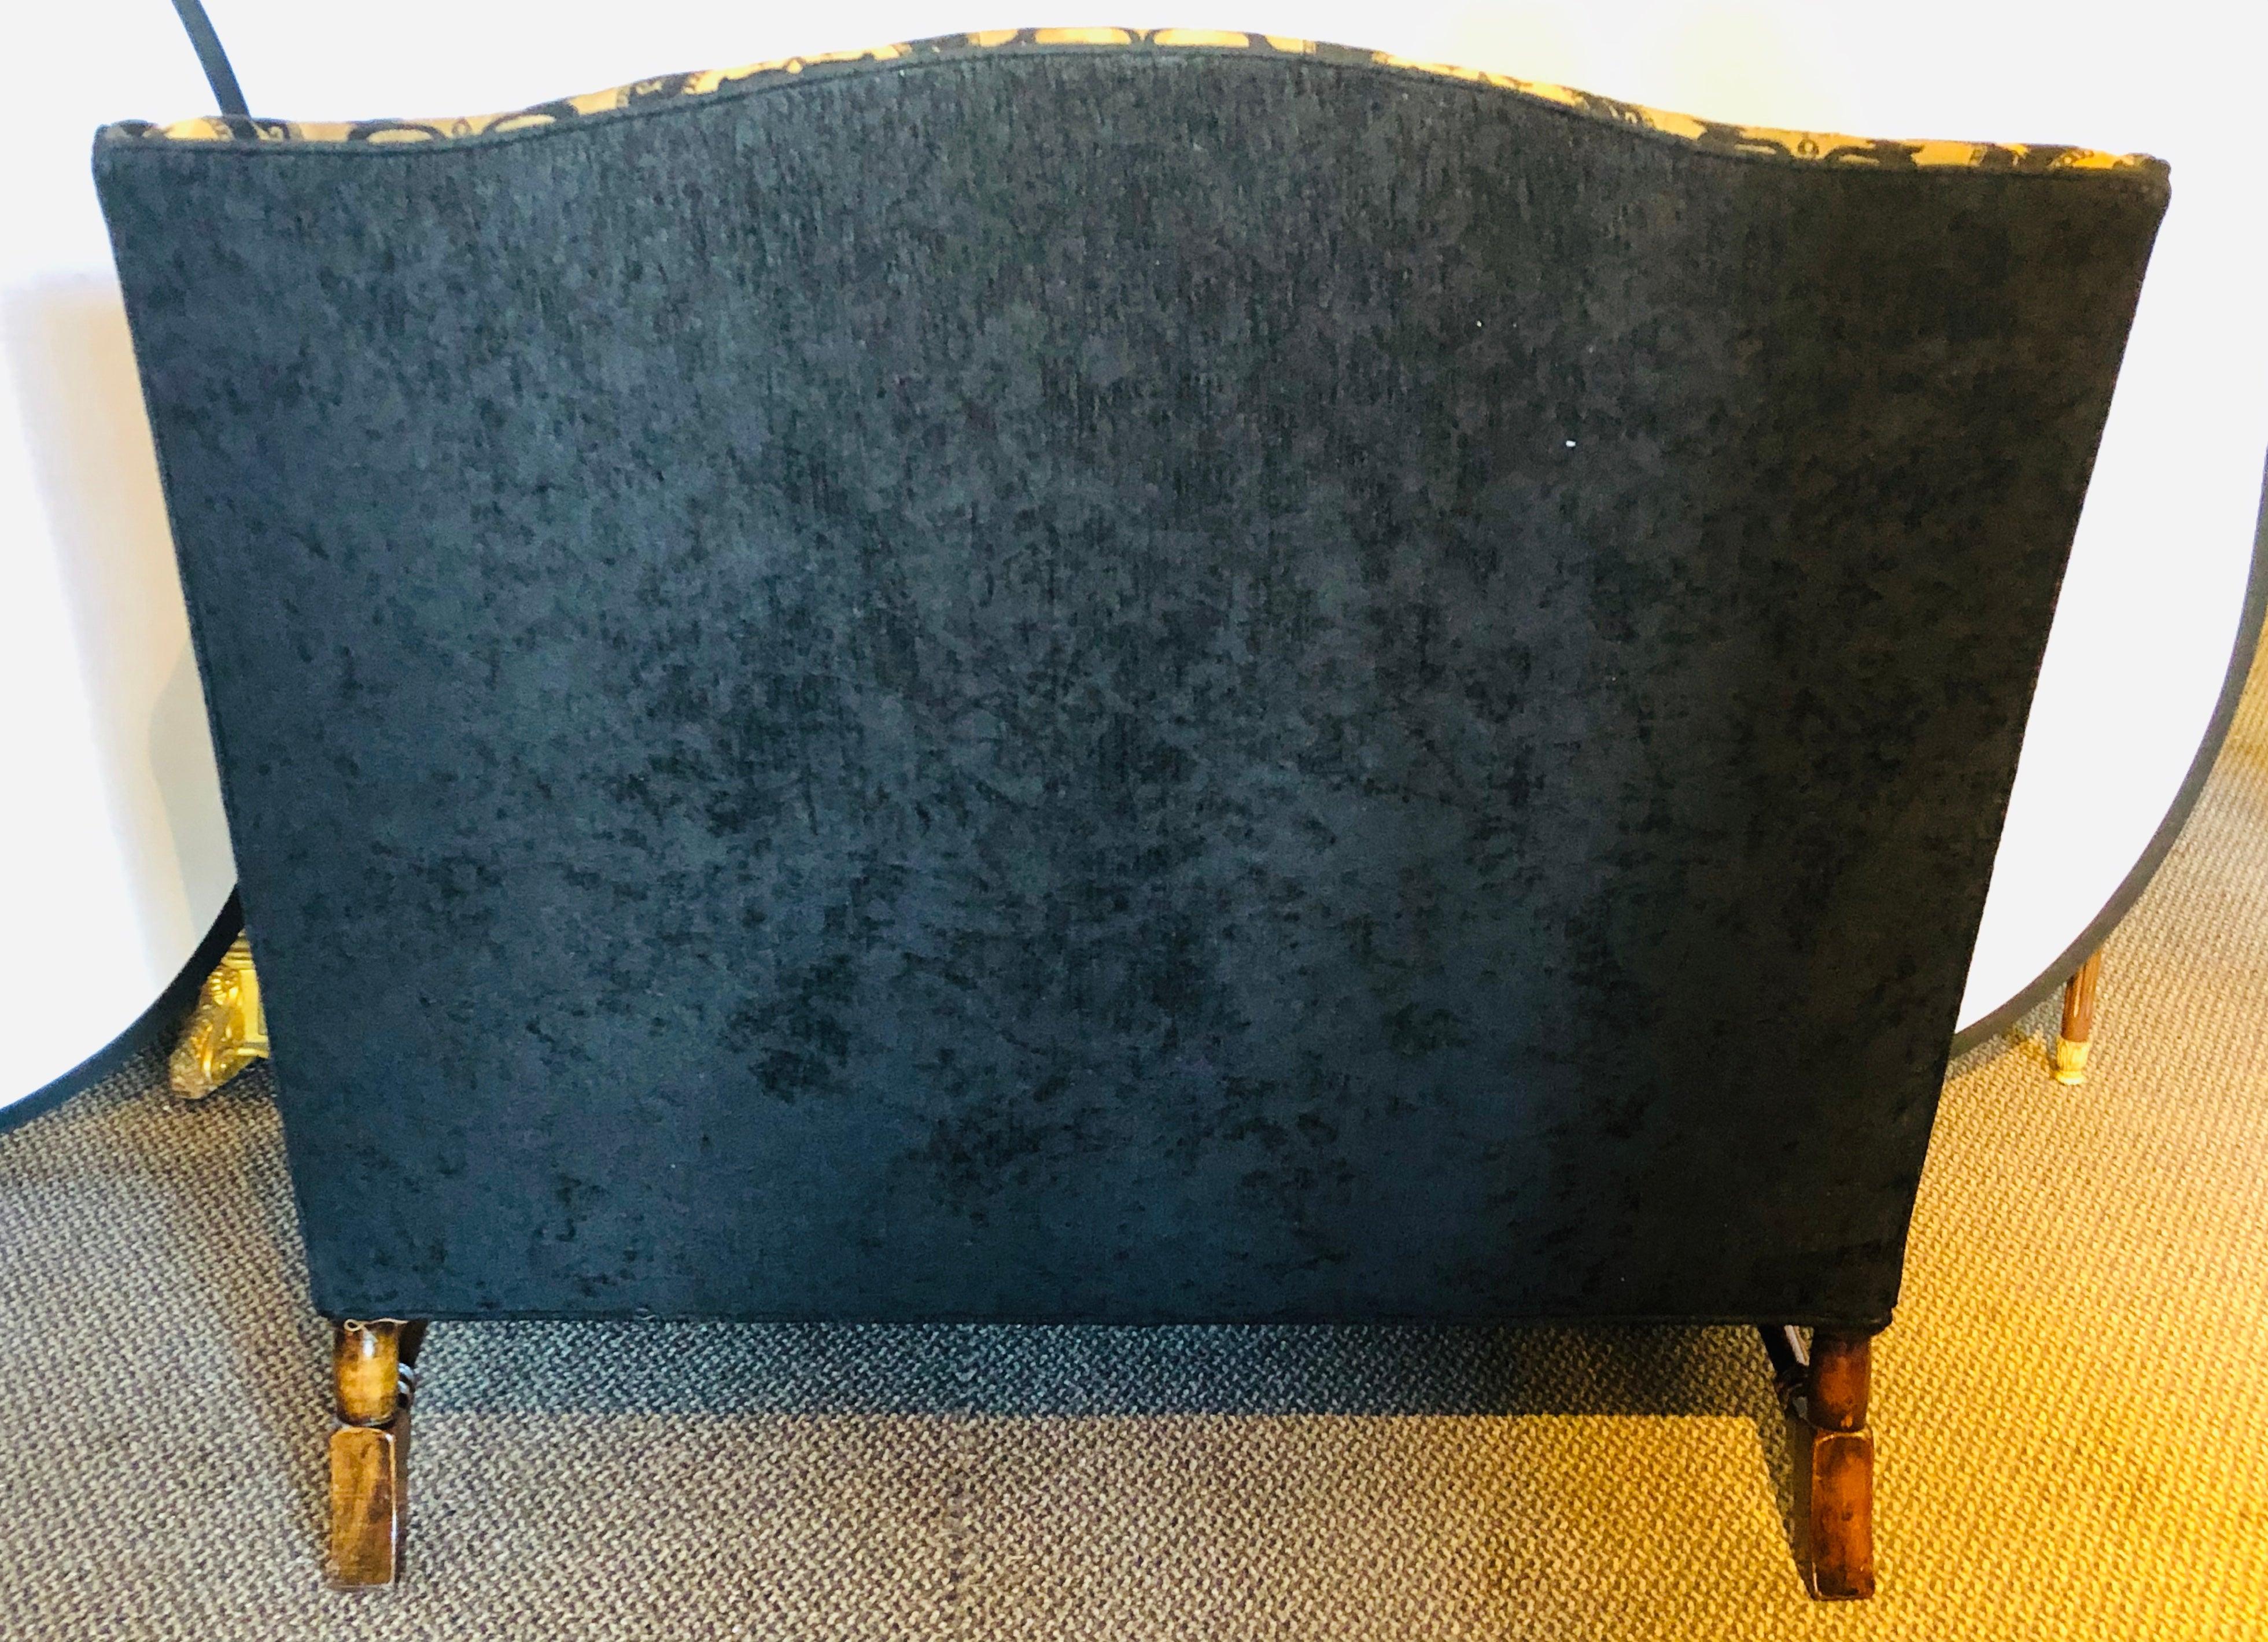 Italian Rococo Revival Style Settee or Sofa, Black and Beige Upholstery, a Pair For Sale 8